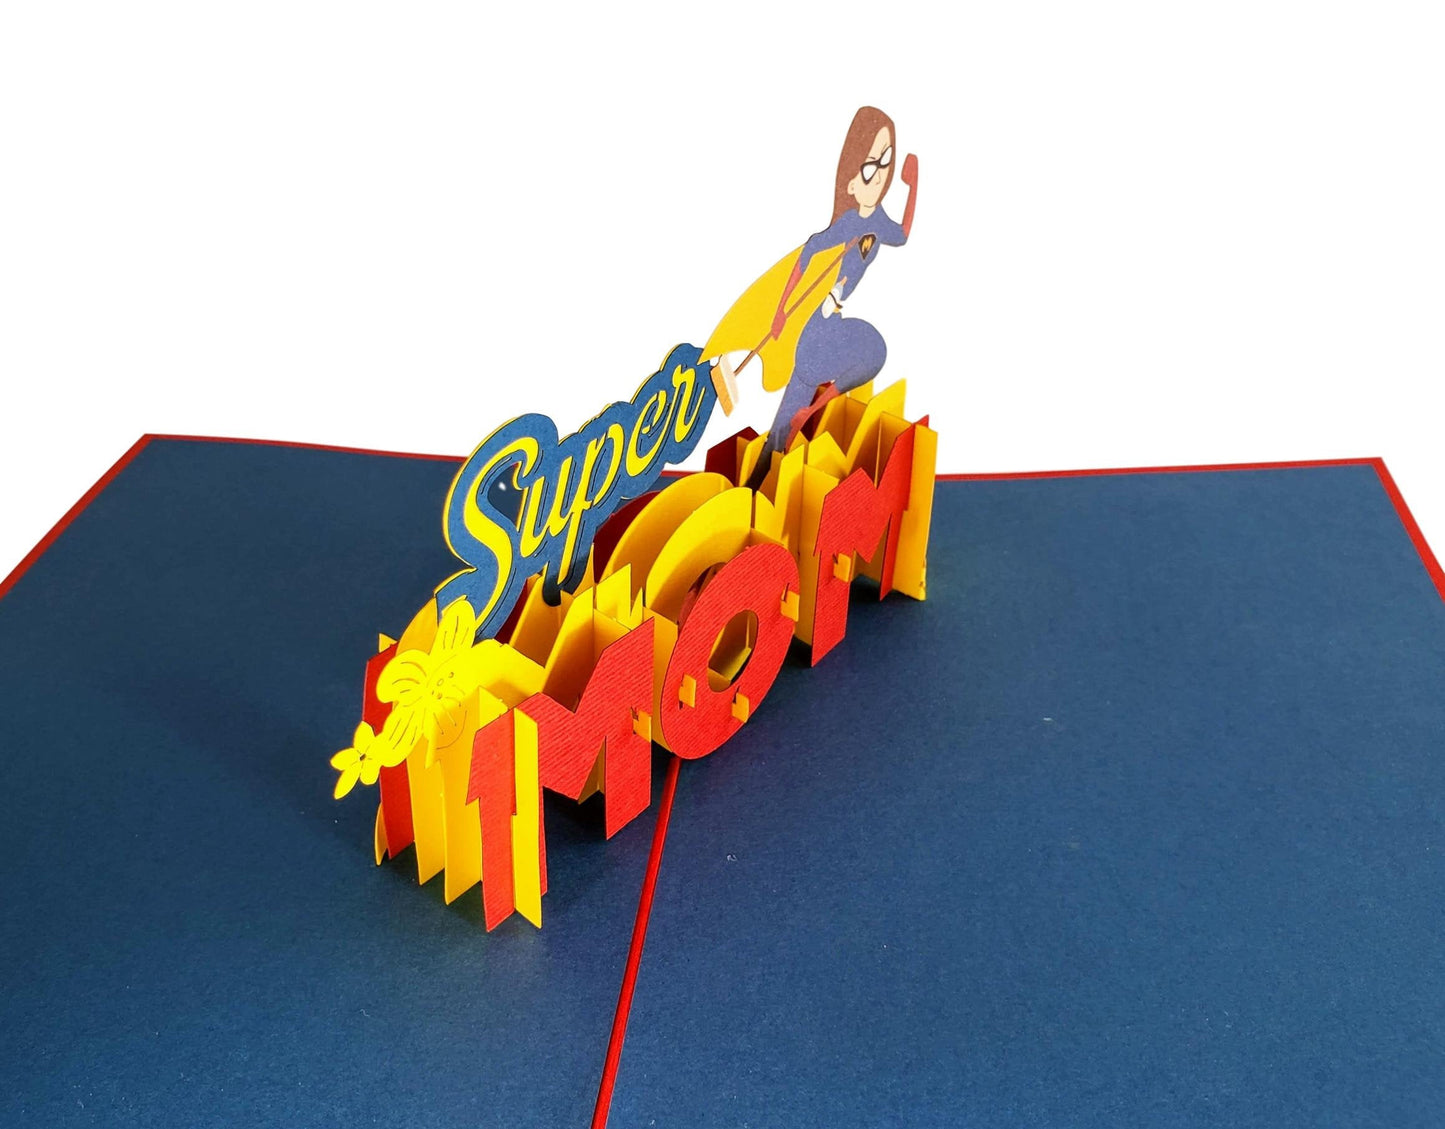 Super Mom 3D Pop Up Greeting Card - Birthday - Blue - Mom - Mother's Day - Red - Yellow - iGifts And Cards